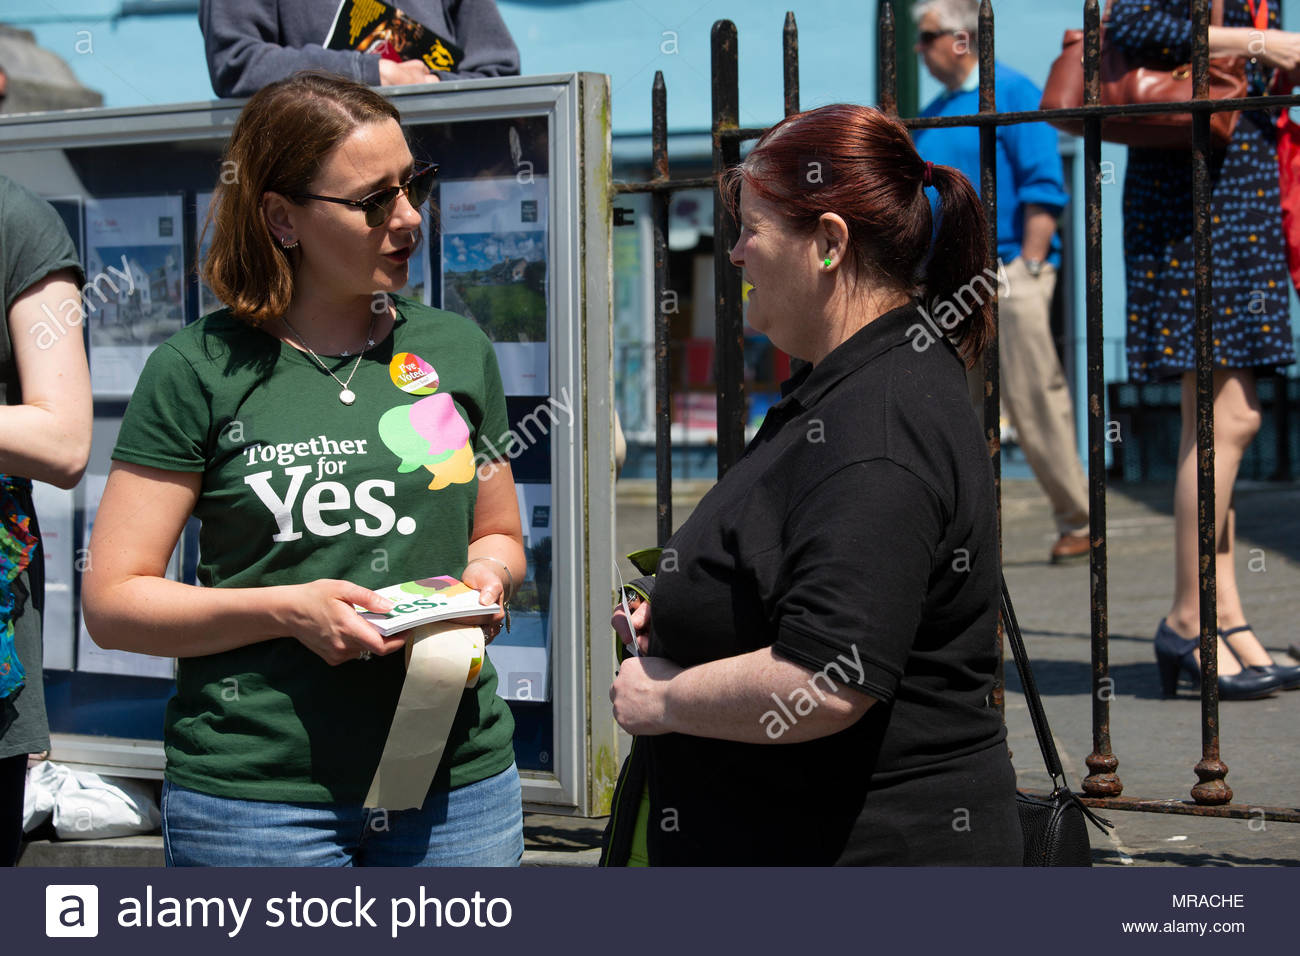 Ennis, County Clare, Ireland, 25 May 2018.  A yes campaign activist engages with a woman in Ennis as the referendum enters its last few hours. Exit polls suggested a landslide victory for the Yes side, thus paving the way for the repeal of Ireland's strict law on abortion. Counting is now underway. Credit: reallifephotos/Alamy Live News Stock Photo